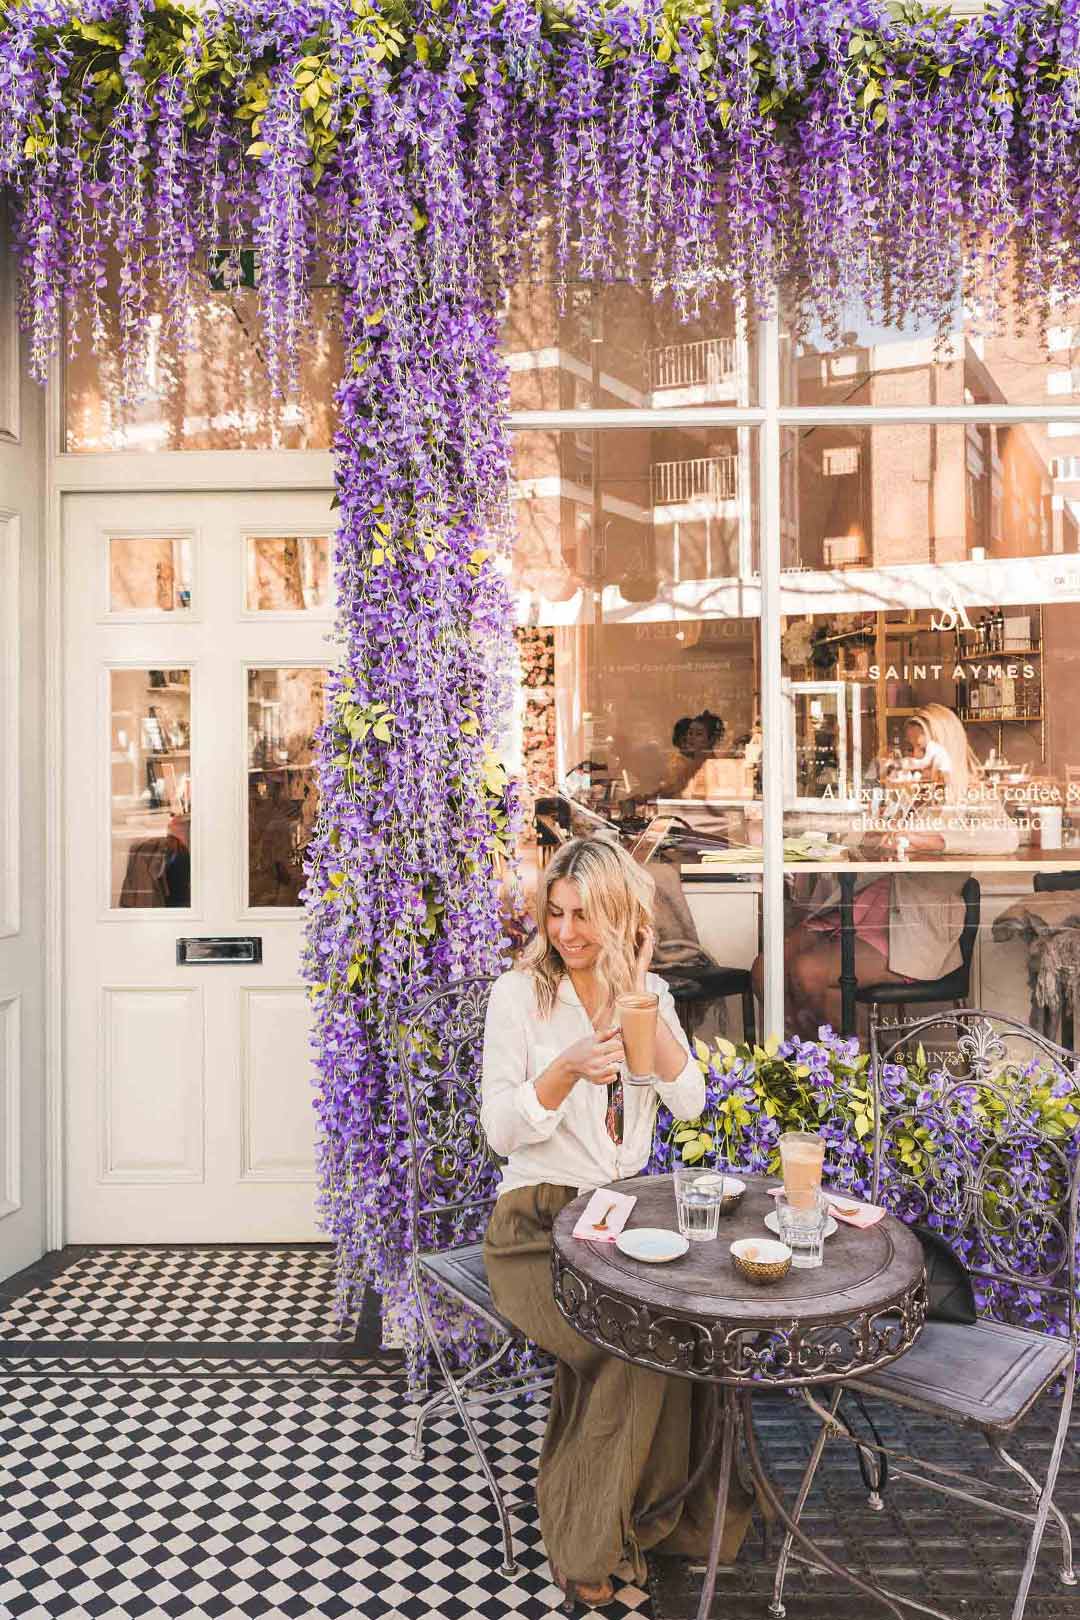 4. Beautiful Cafes in London - Saint Aymes